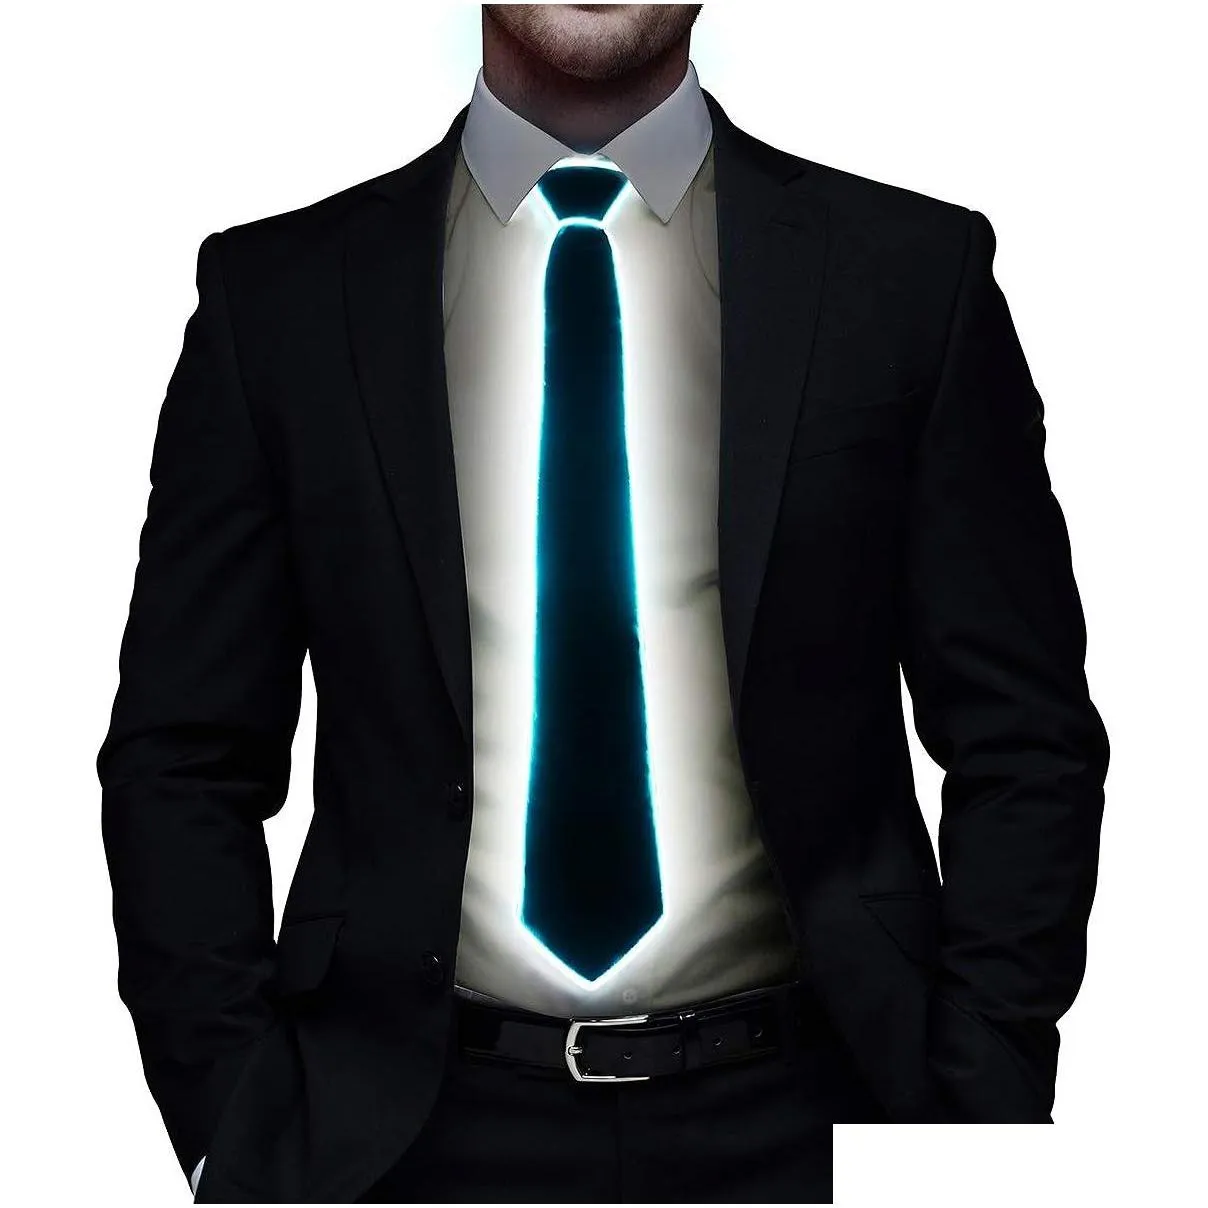 Other Motorcycle Accessories Led Tie Light Up Fanny Ties Novelty Necktie For Men Accessory Drop Delivery Mobiles Motorcycles Ot9Ar